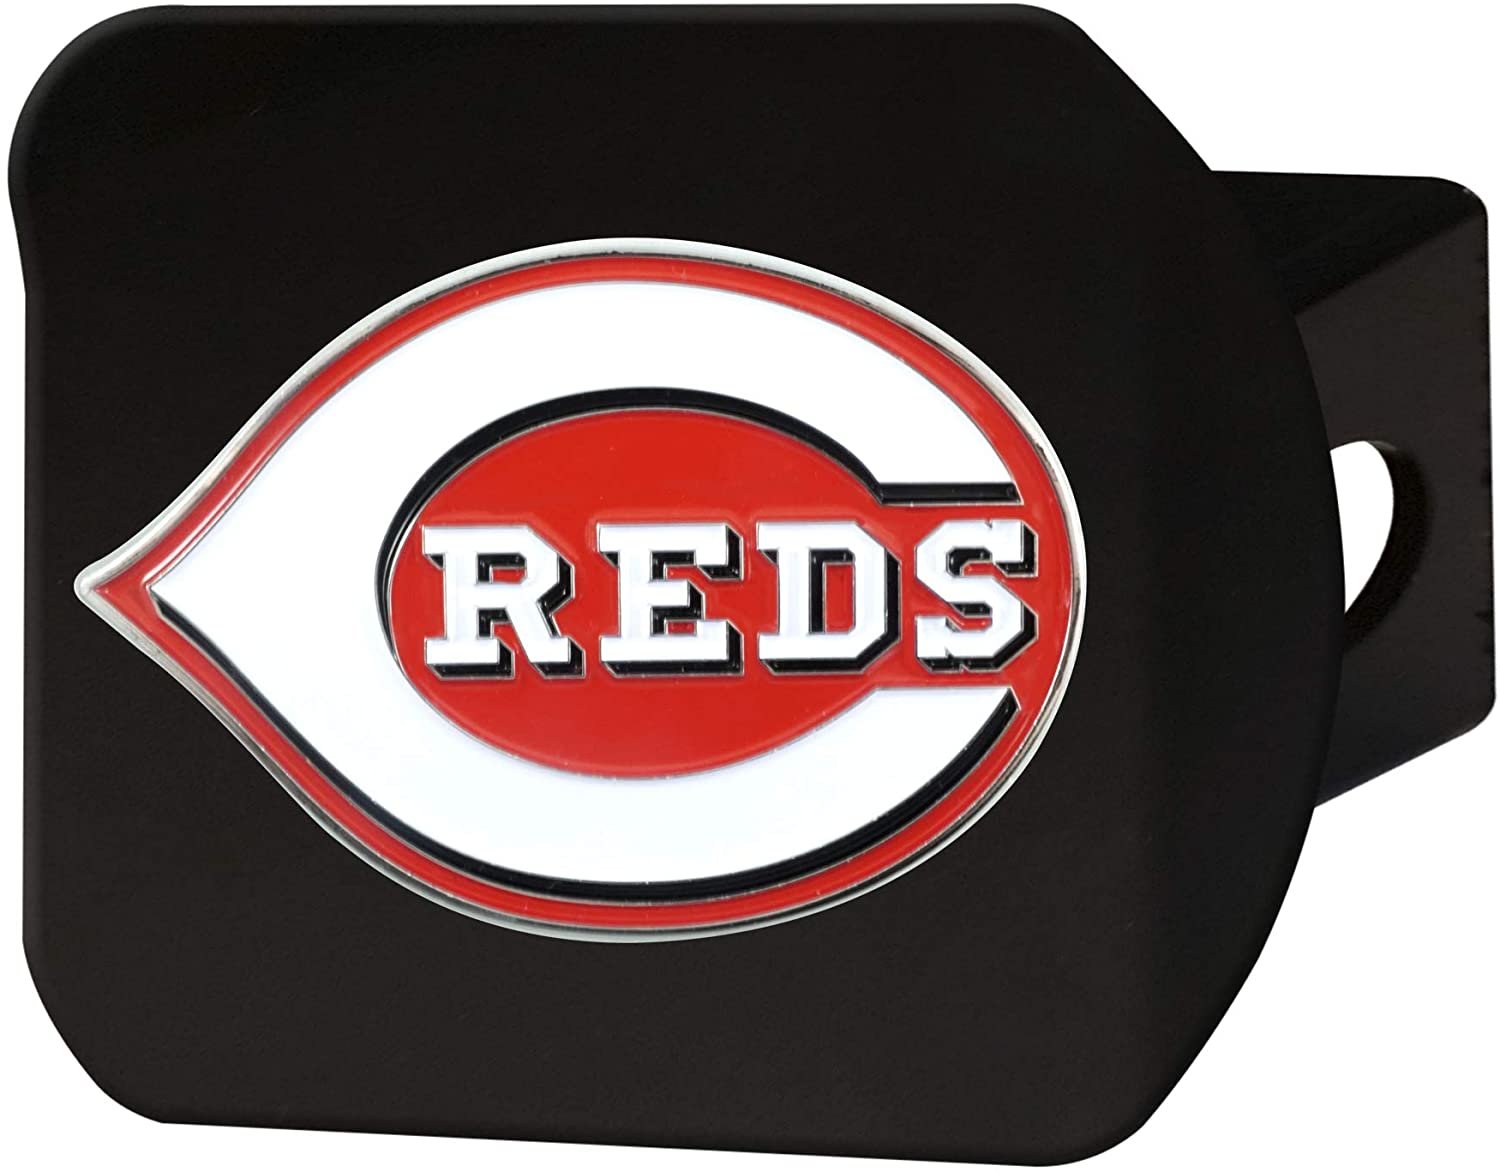 Cincinnati Reds Hitch Cover Black Solid Metal with Raised Color Metal Emblem 2" Square Type III